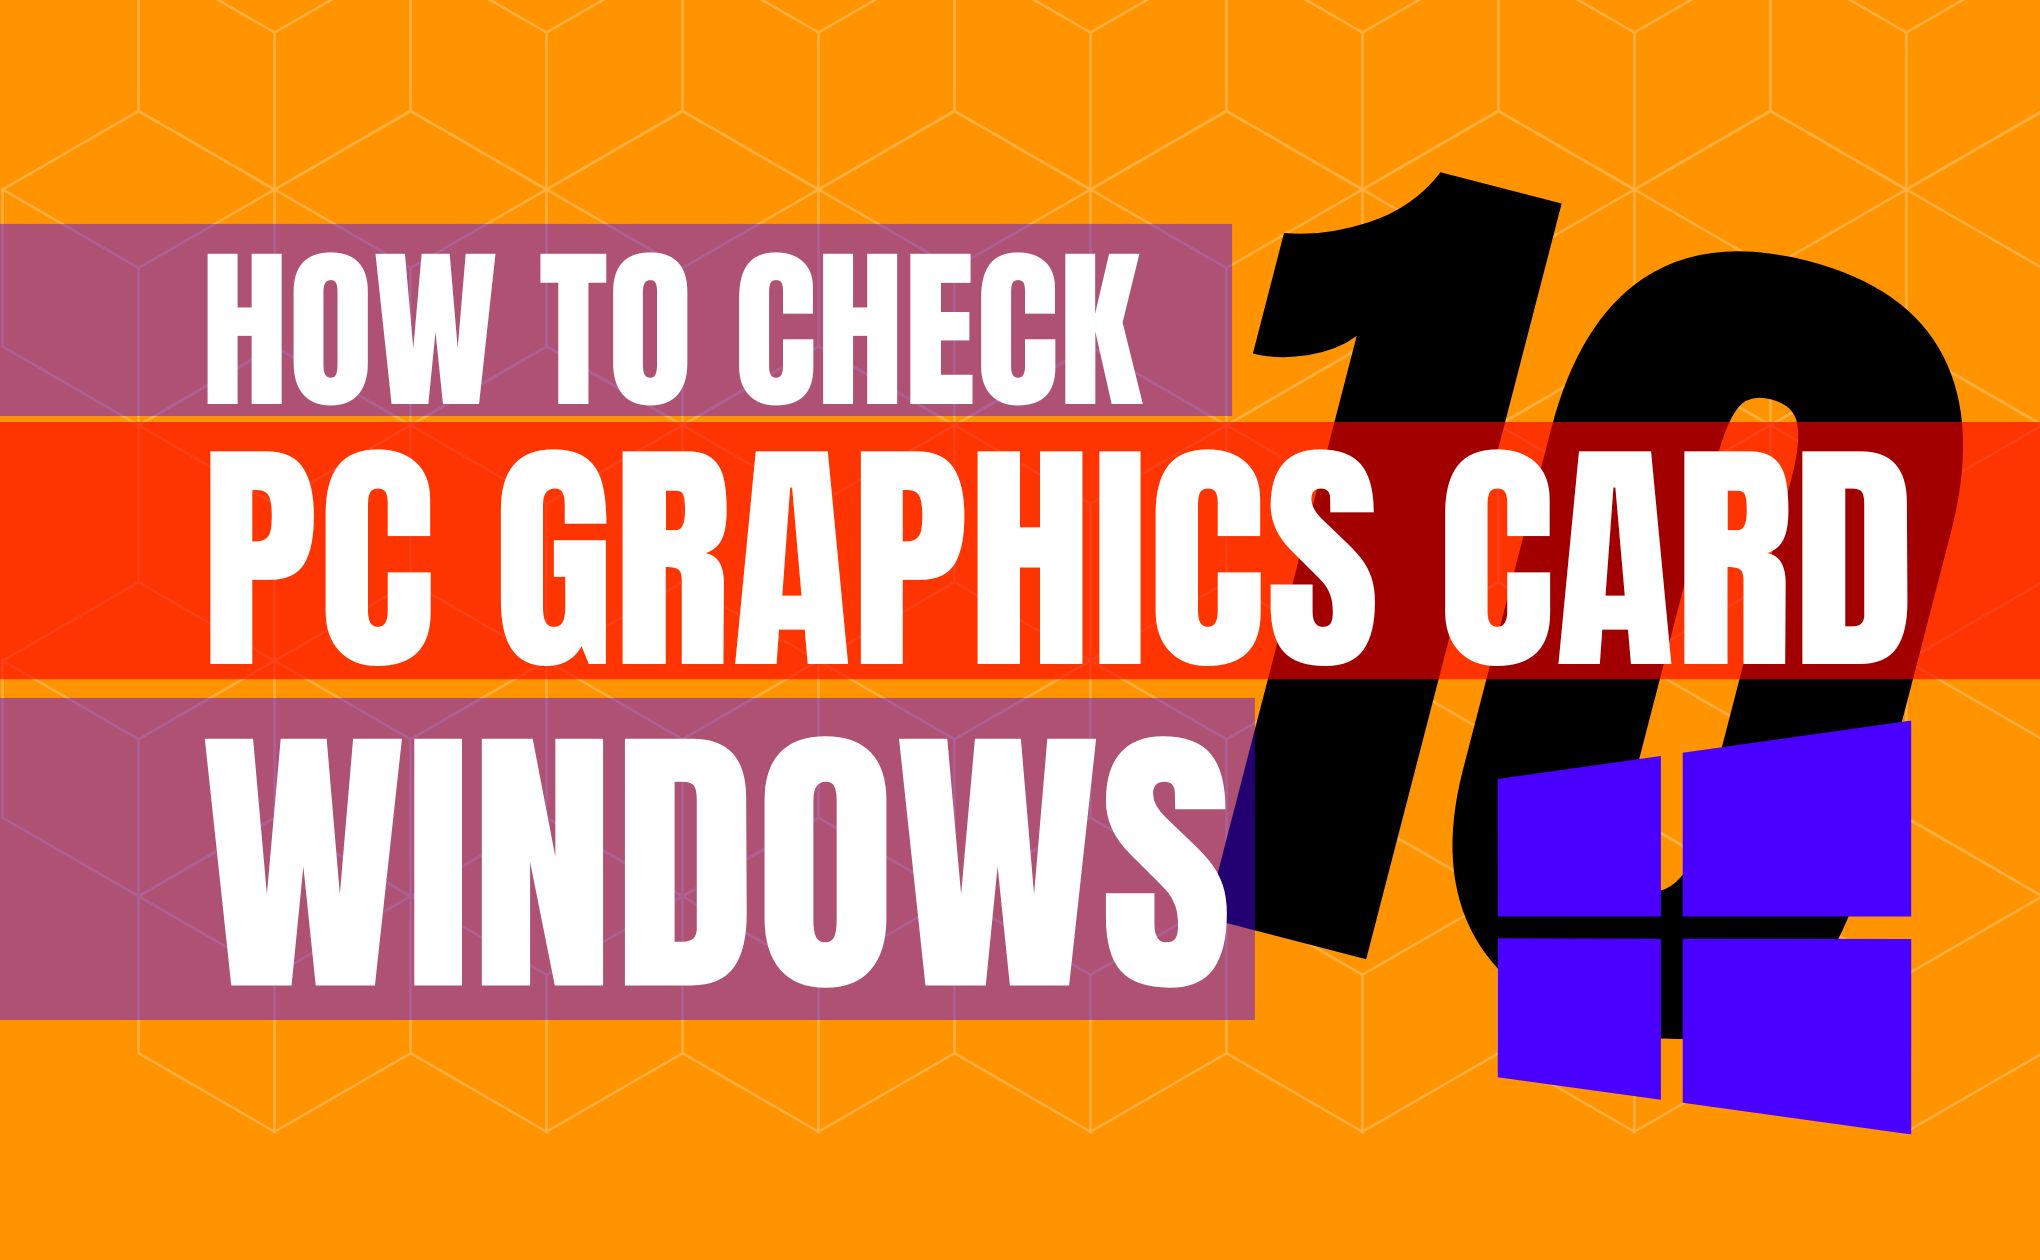 How to check PC graphics card windows 10